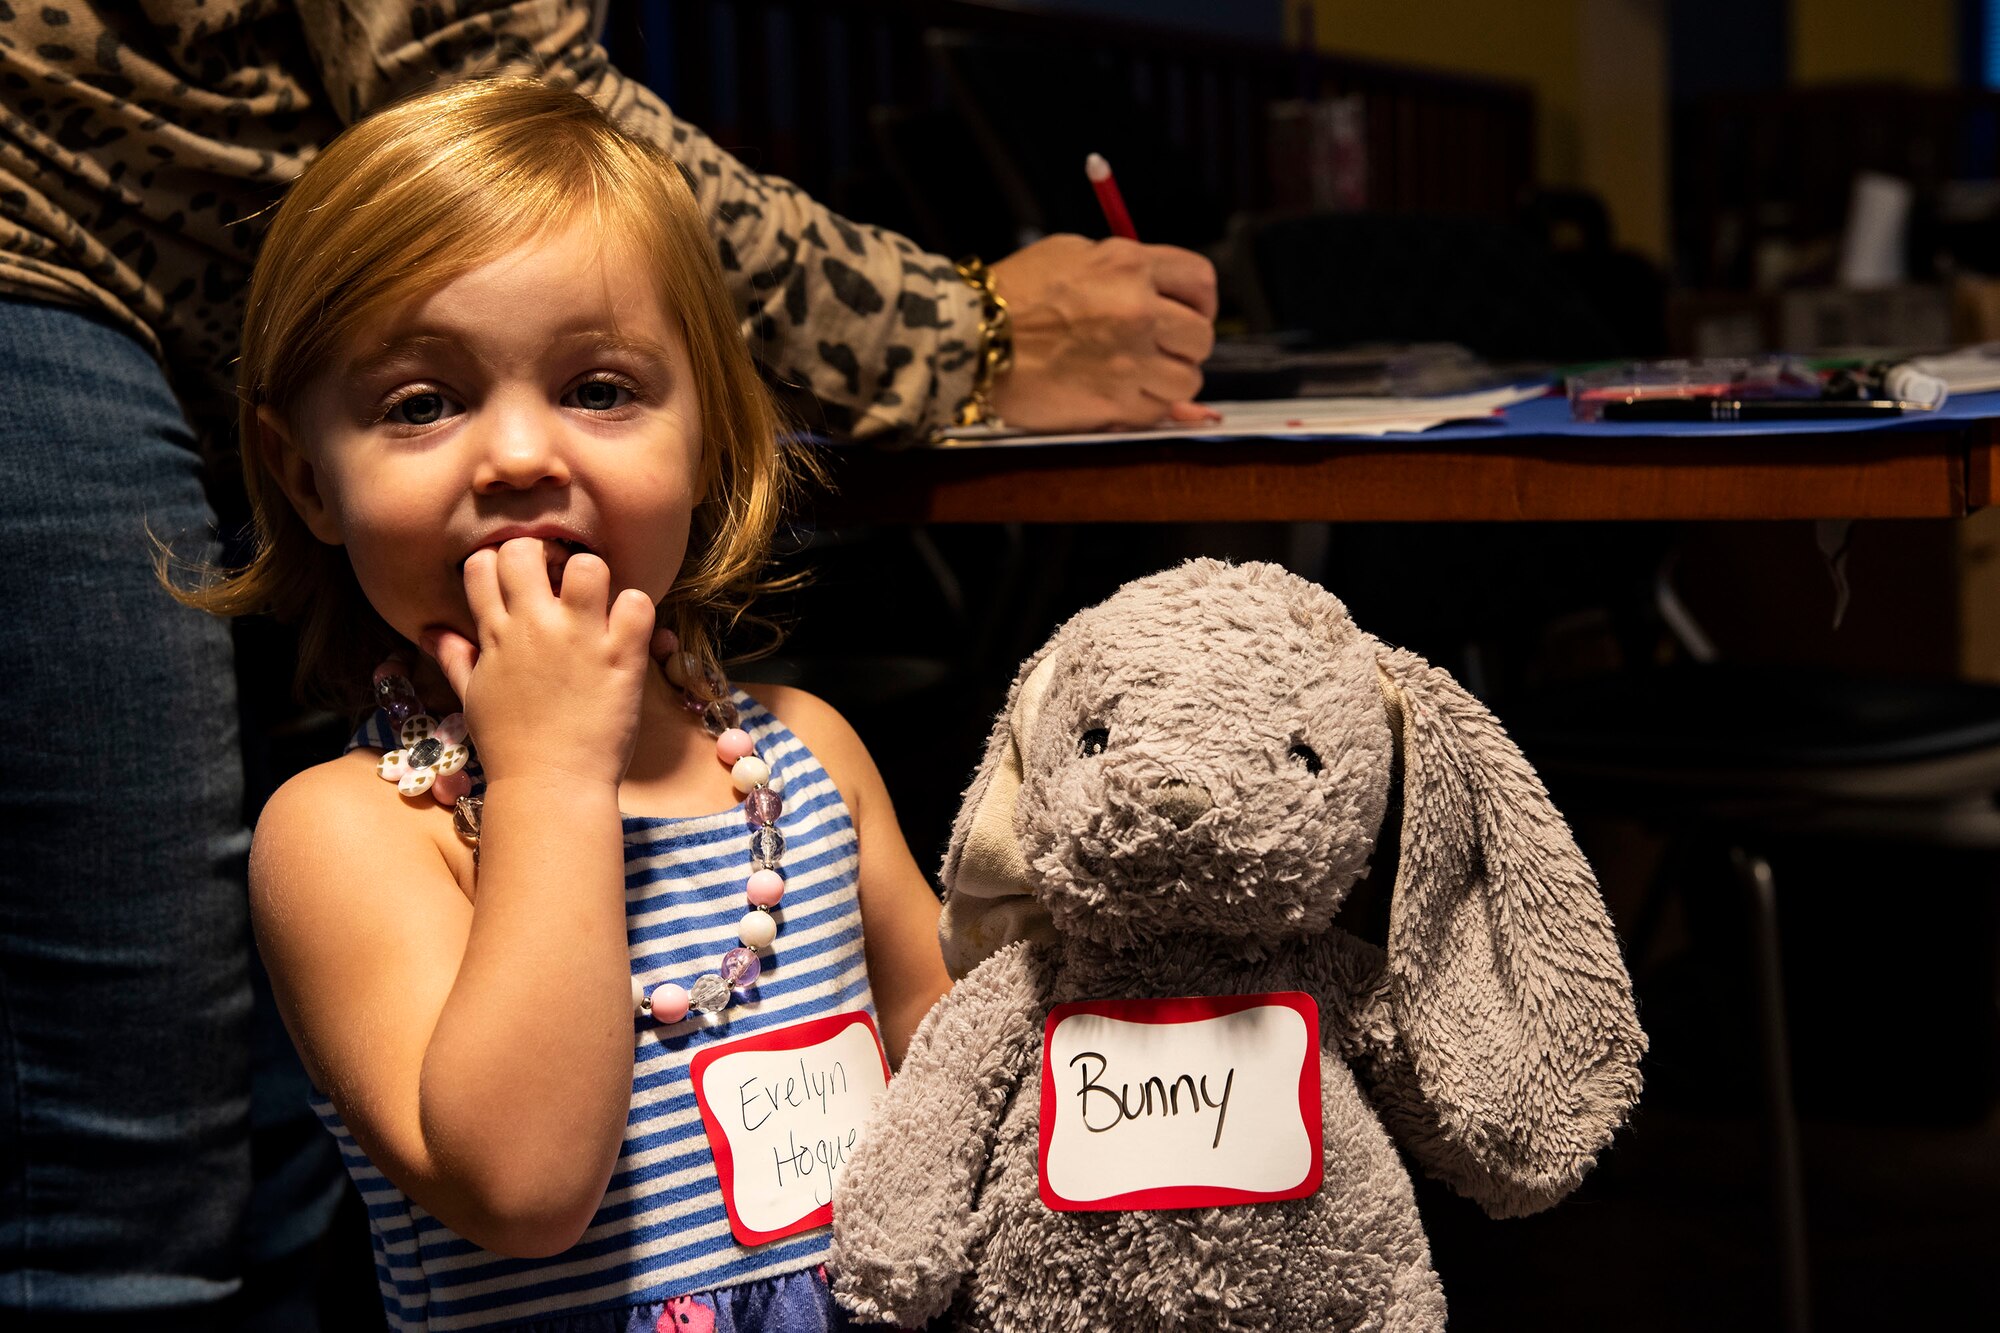 Evelyn, daughter of Laura Hogue, military spouse, poses for a photo during a Deployed Spouses Dinner Sept. 17, 2019, at Moody Air Force Base, Ga. The monthly event is a free dinner at Georgia Pines Dining Facility designed as a ‘thank you’ for each families’ support and sacrifice. The dinner, occurring on every third Tuesday of the month, provides an opportunity for spouses to interact with other families of deployed Airmen, key spouses and unit leadership, as well as provide a break for the spouse while military sponsor is deployed. The next Deployed Spouses Dinner will be Oct. 15. (U.S. Air Force photo by Senior Airman Erick Requadt)